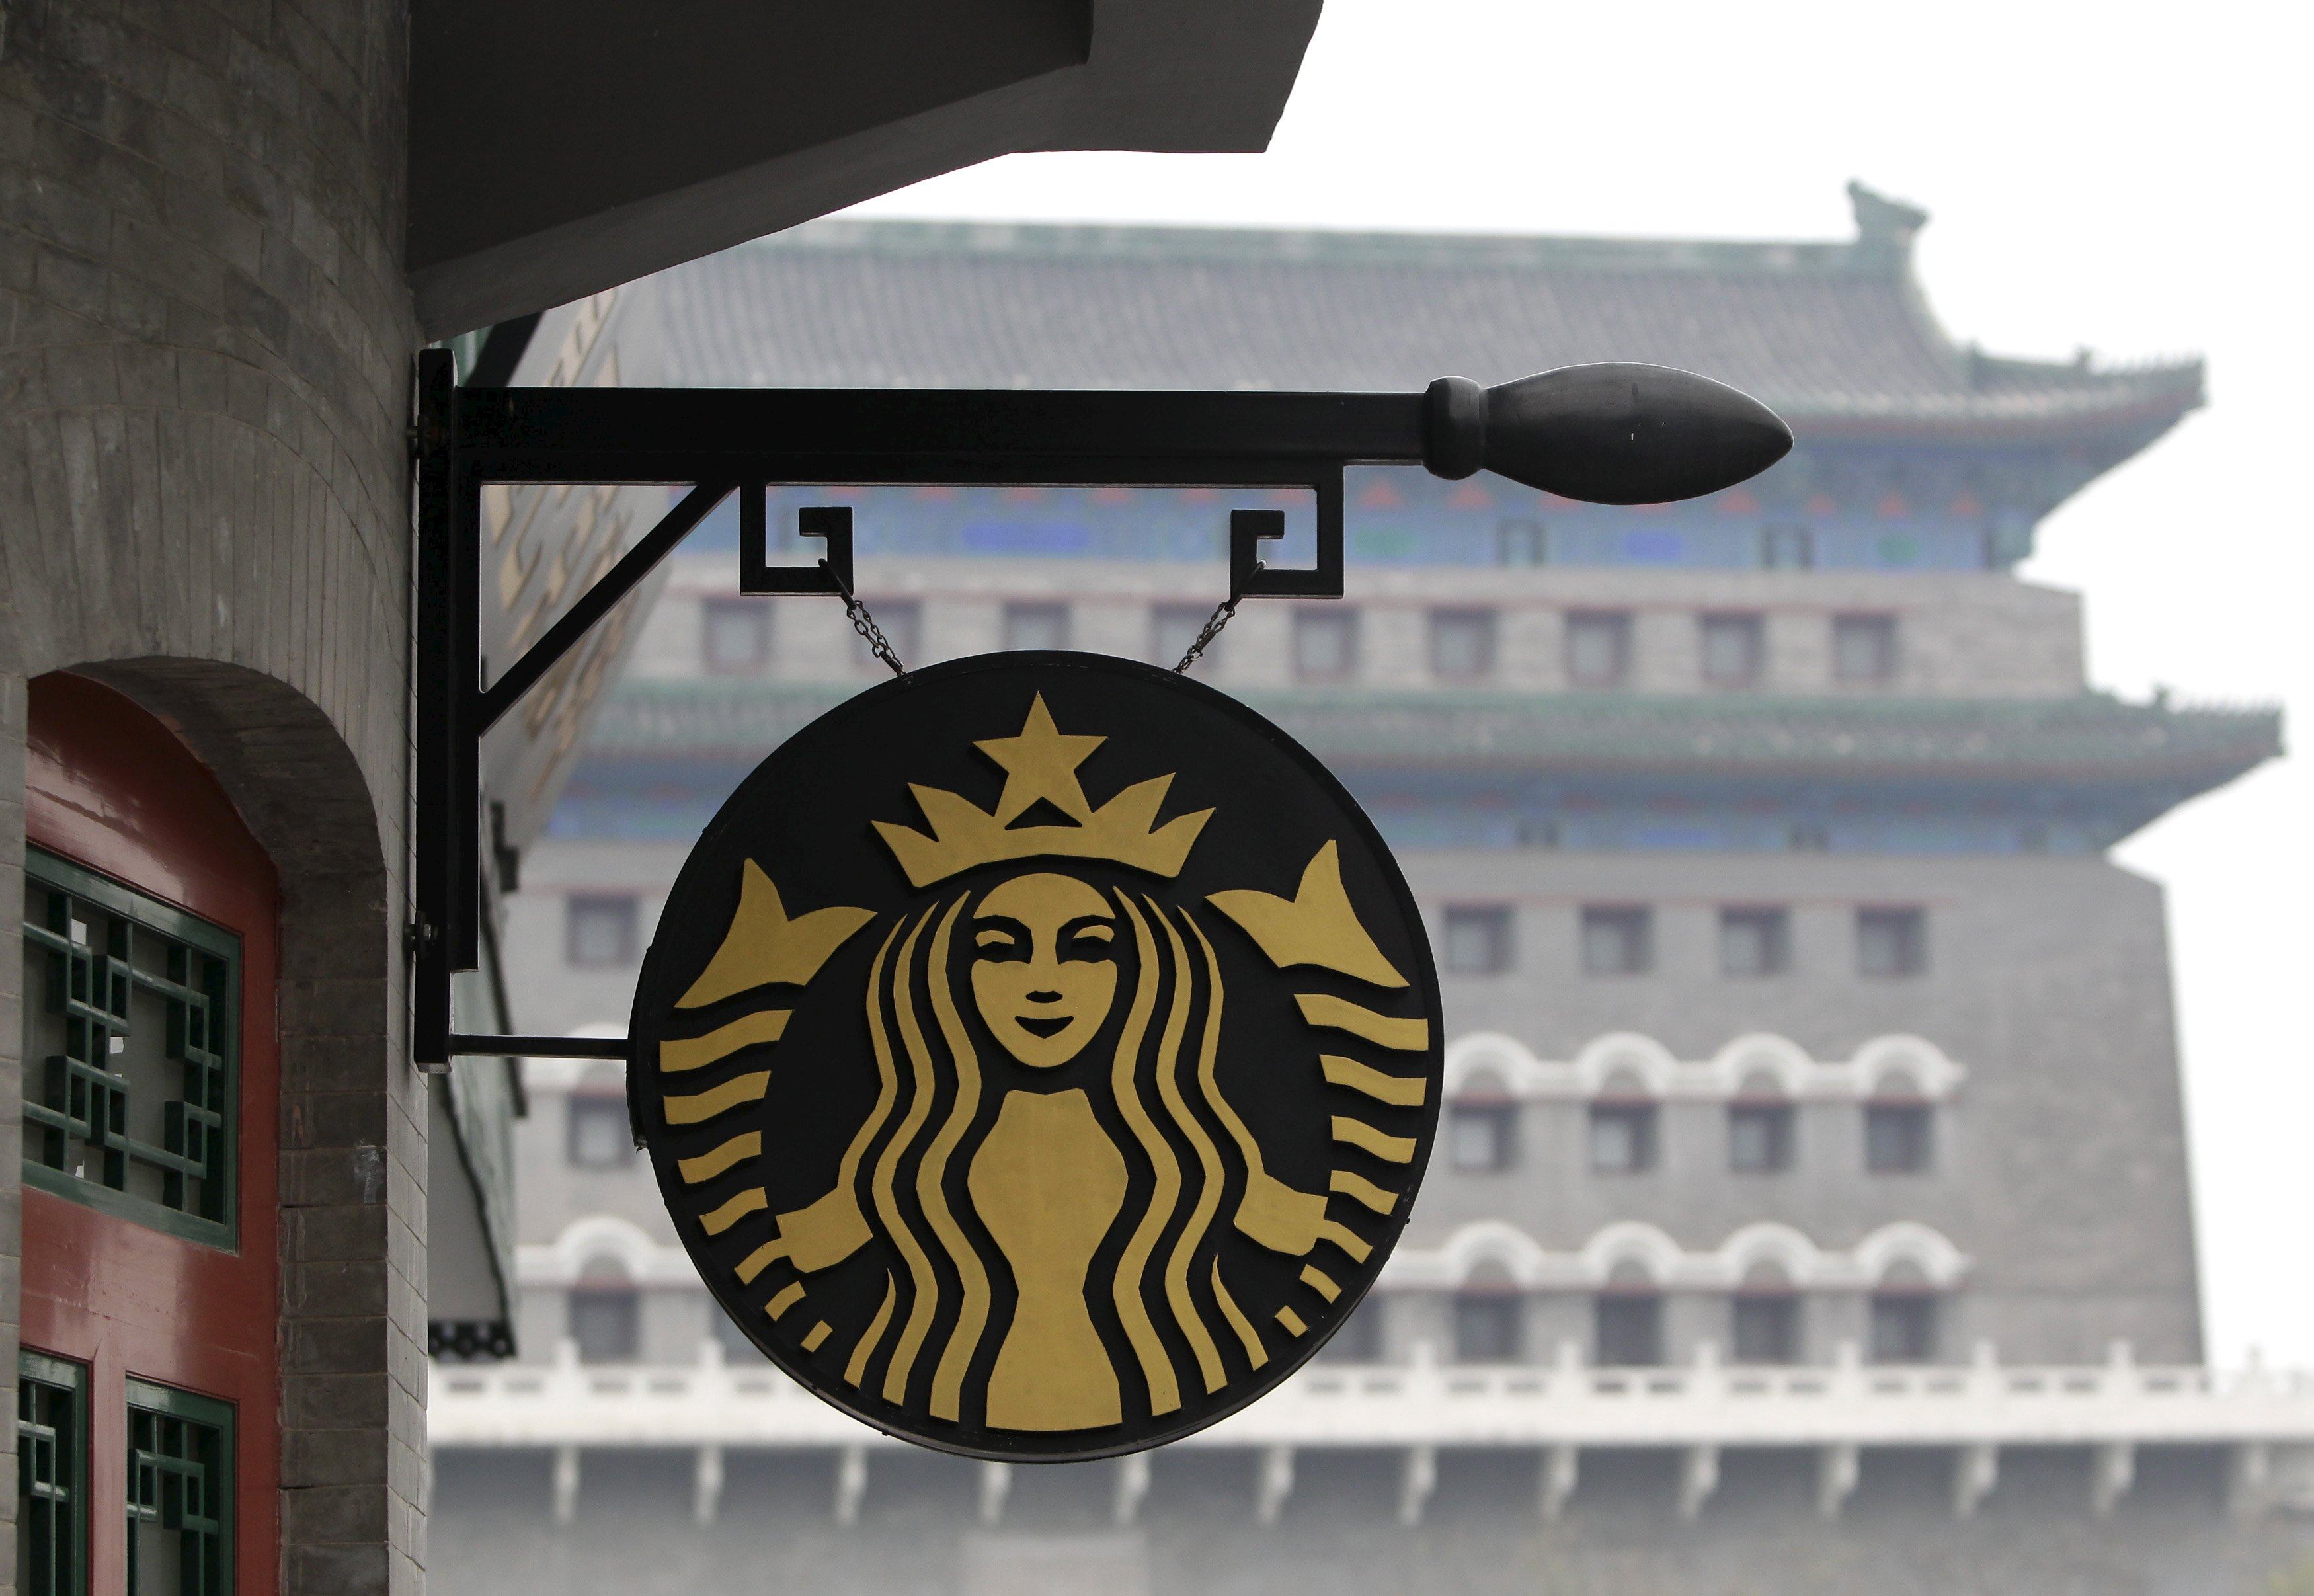 US coffeehouse chain Starbucks is planning to increase its store count to 9,000 by 2025. Photo: Reuters